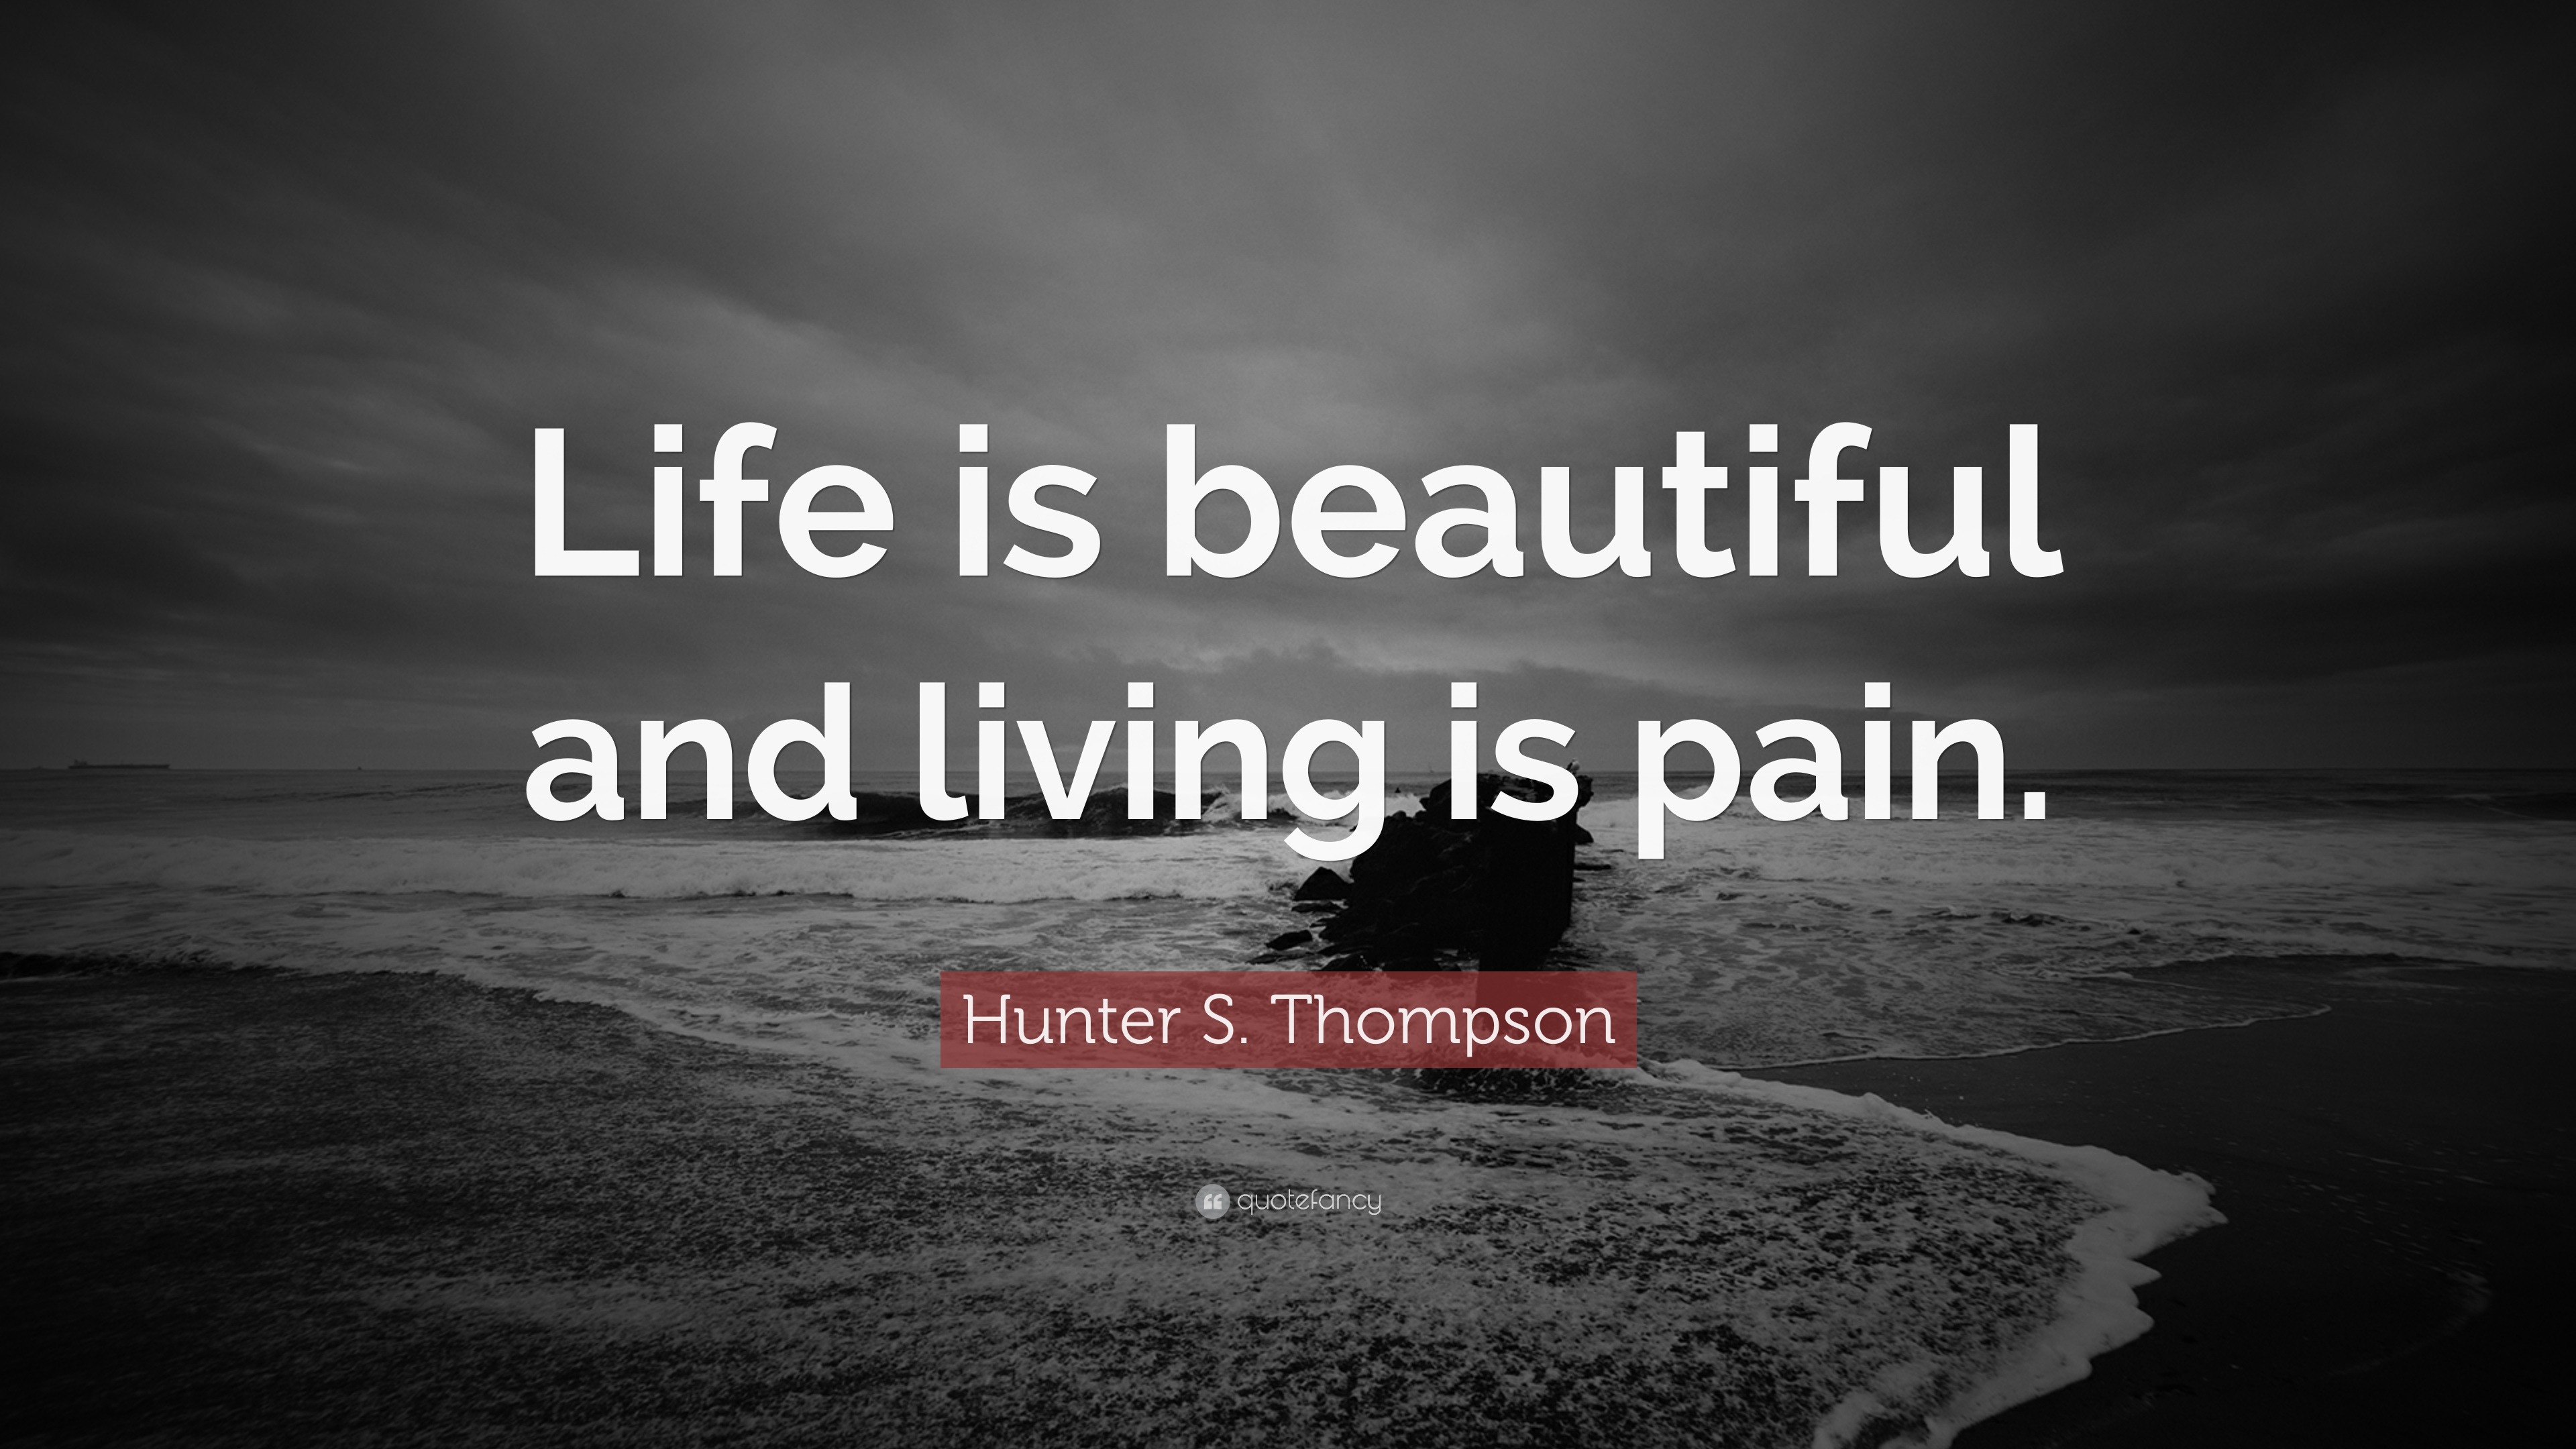 Hunter S Thompson Quote “Life is beautiful and living is pain ”